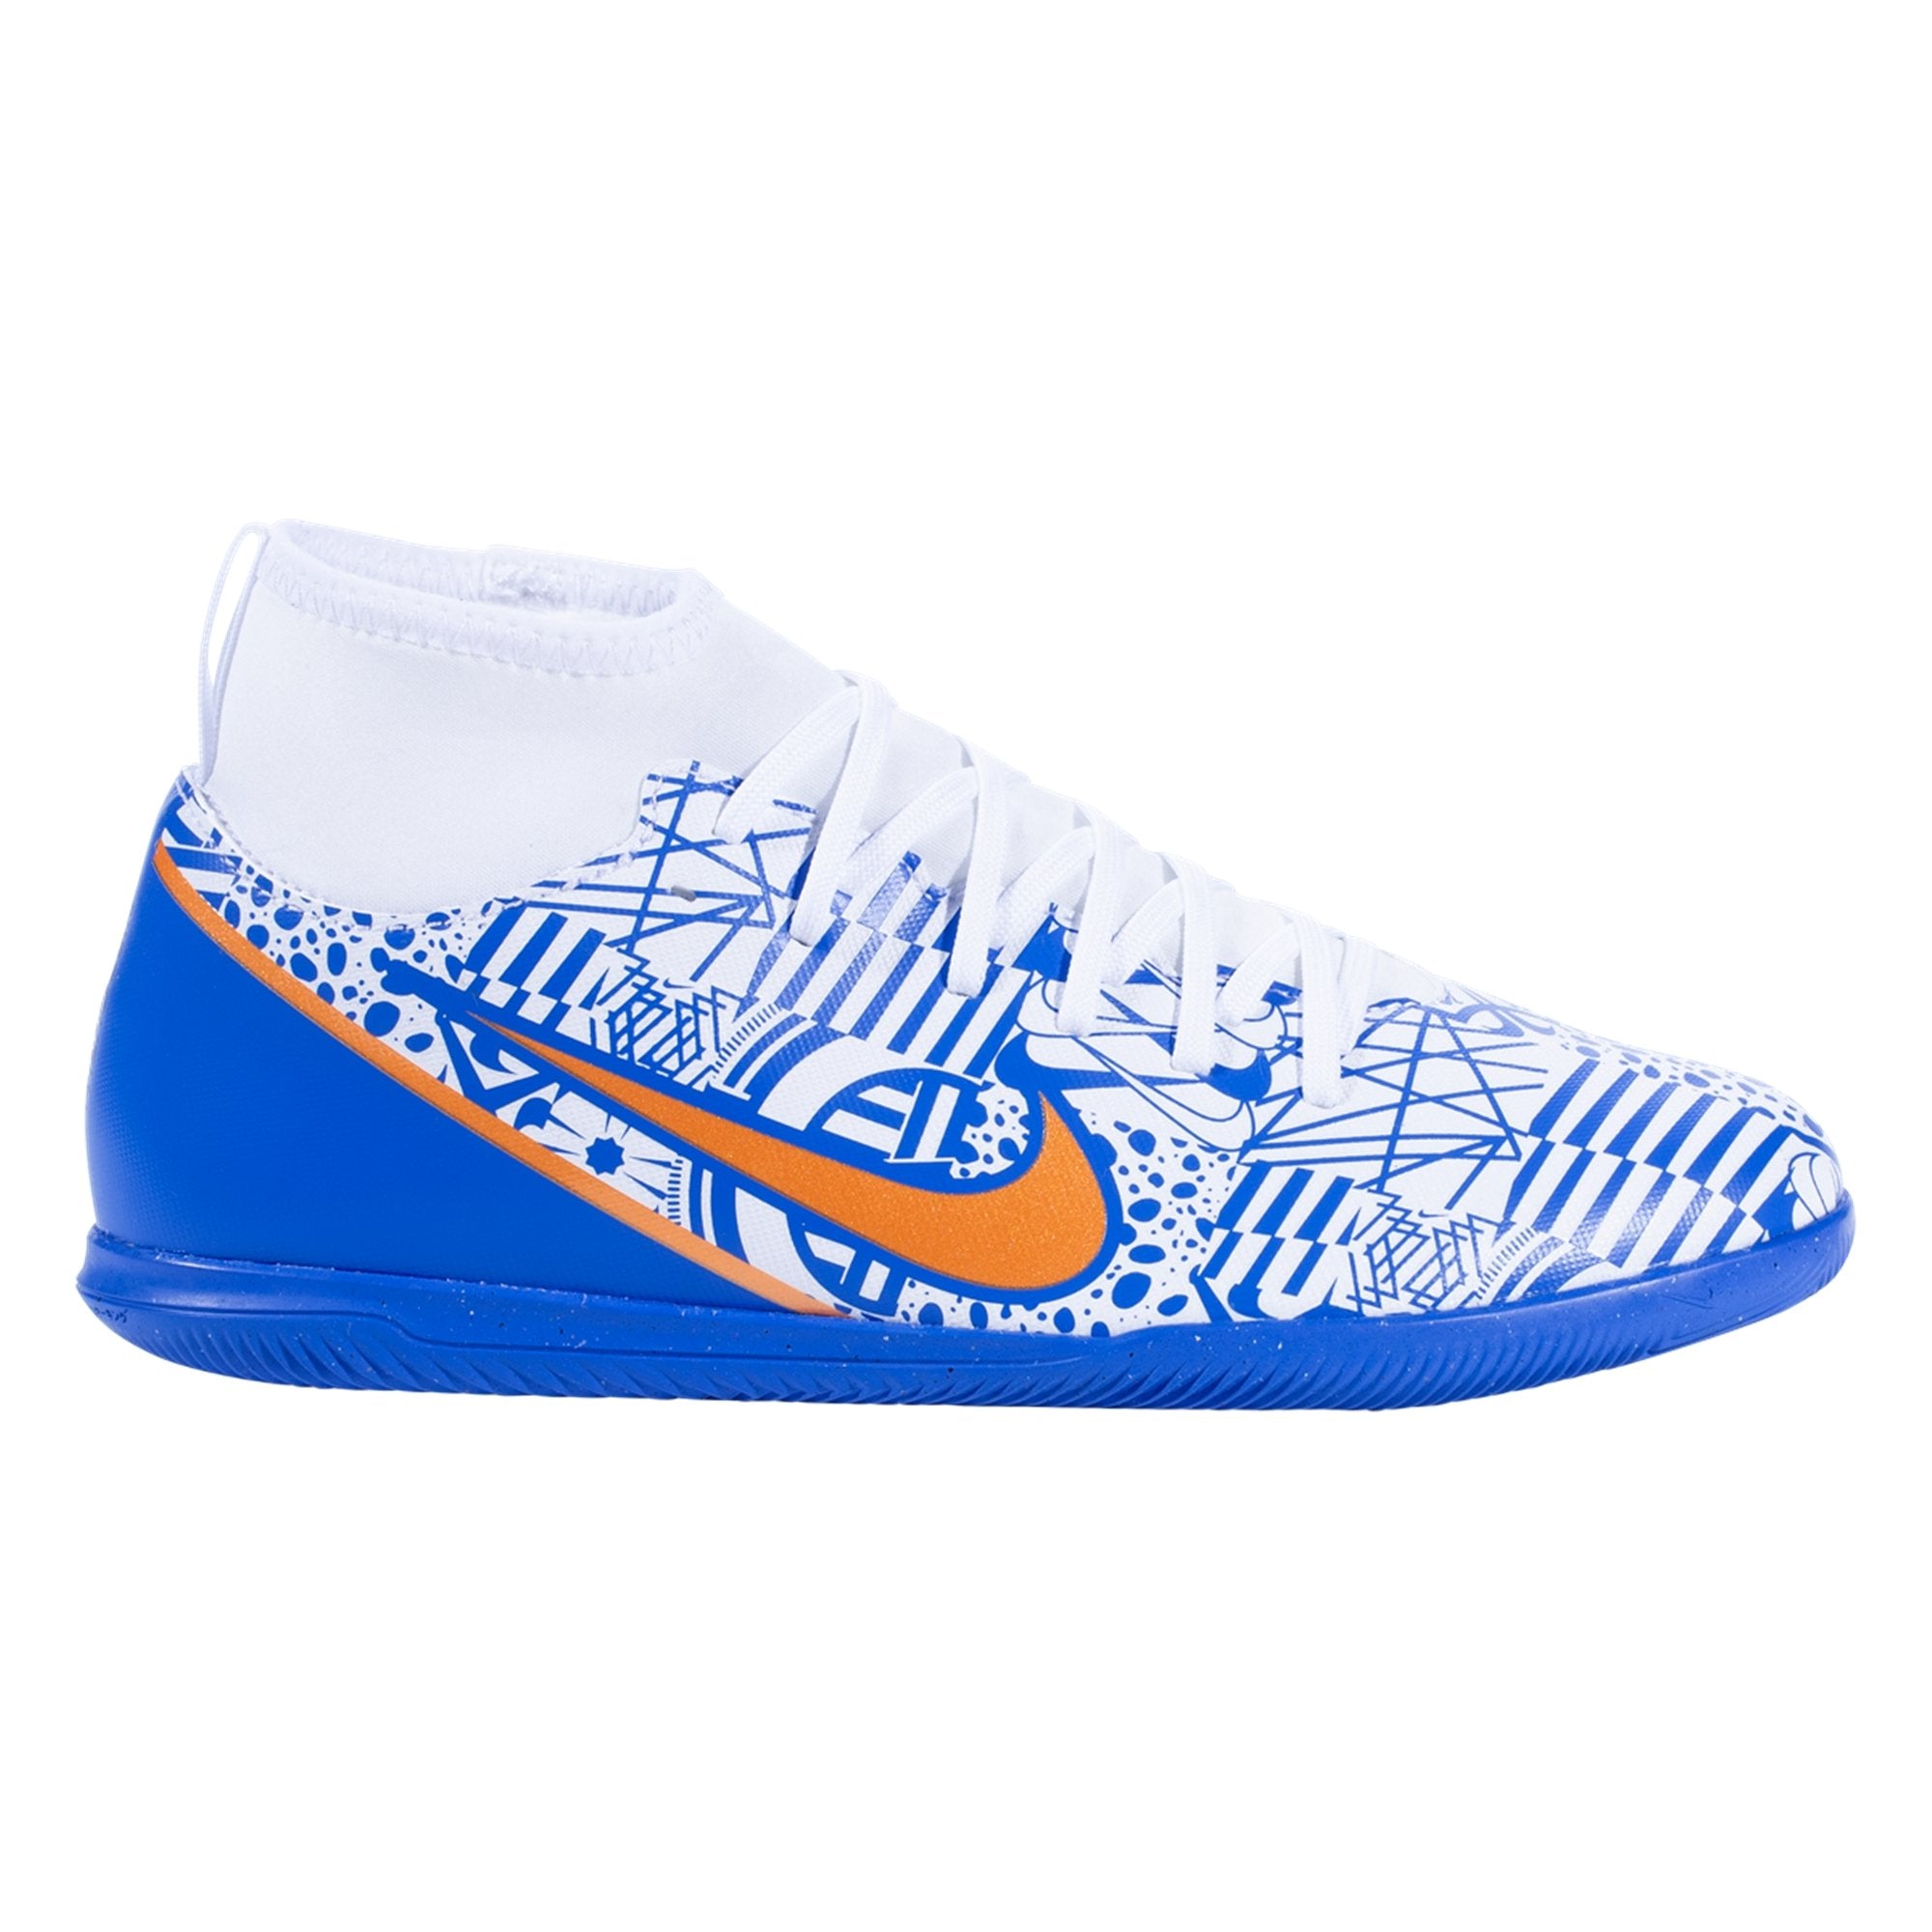 Superfly 9 Club CR7 IC Indoor Shoes - White/MetallicCopper/Concord/MediumBlue DQ5327-182 – Soccer Zone USA